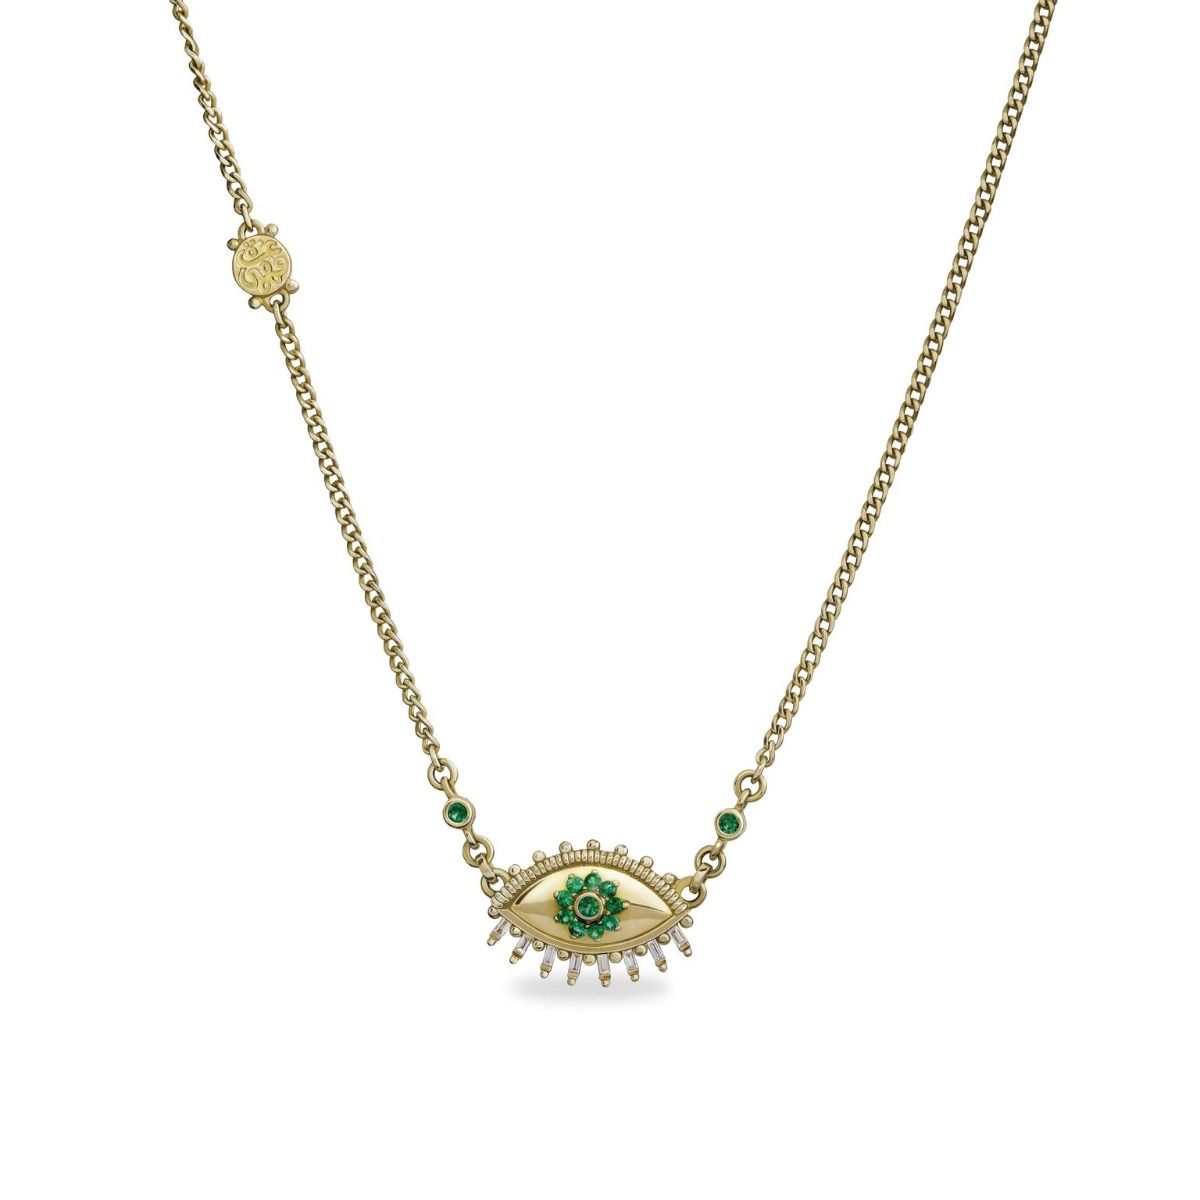 Eye Chain Necklace by Azza Fahmy - Designer Necklaces